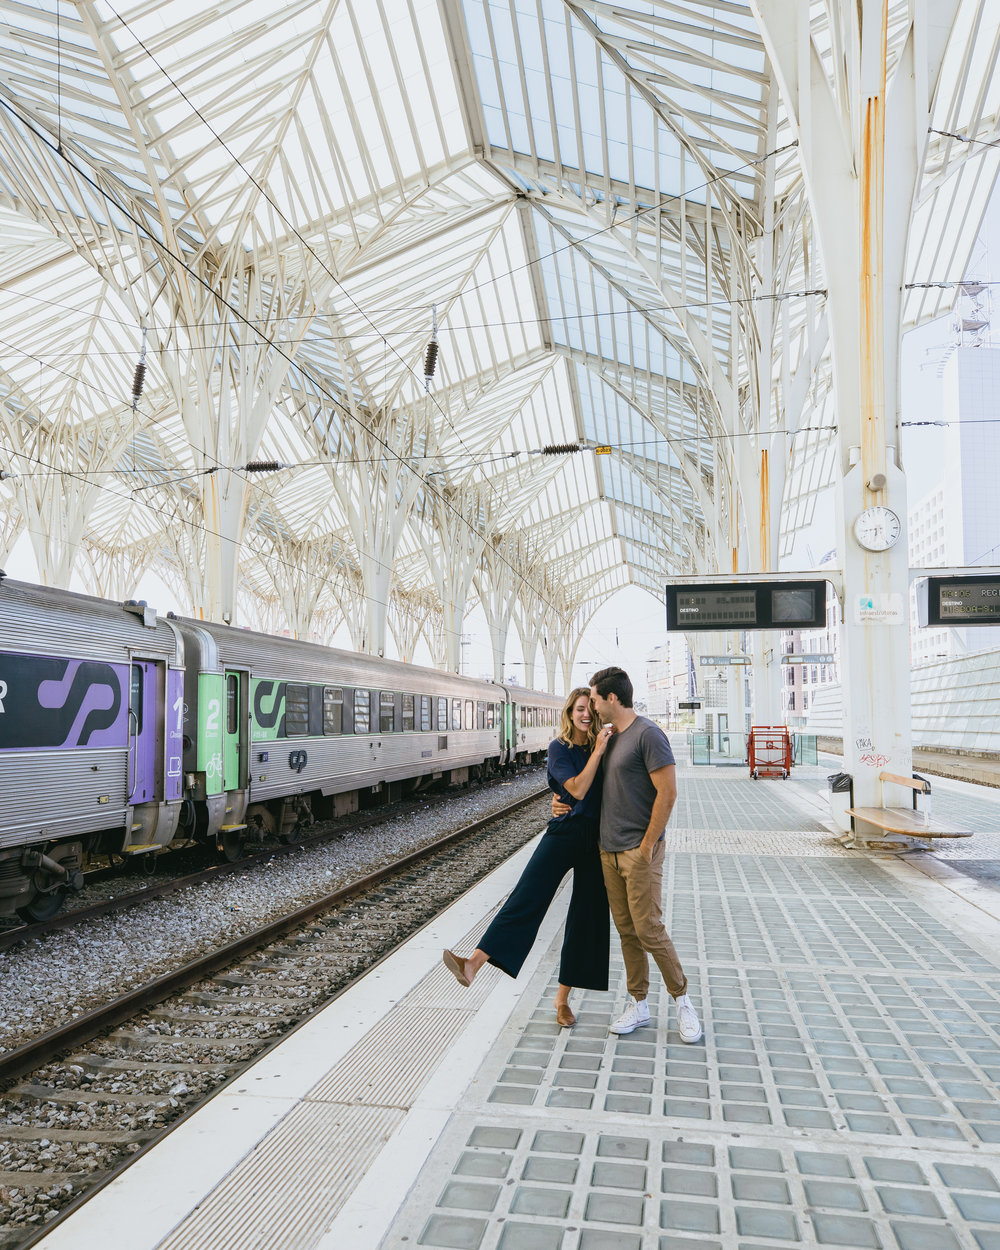 traveling through europe with ACP Rail